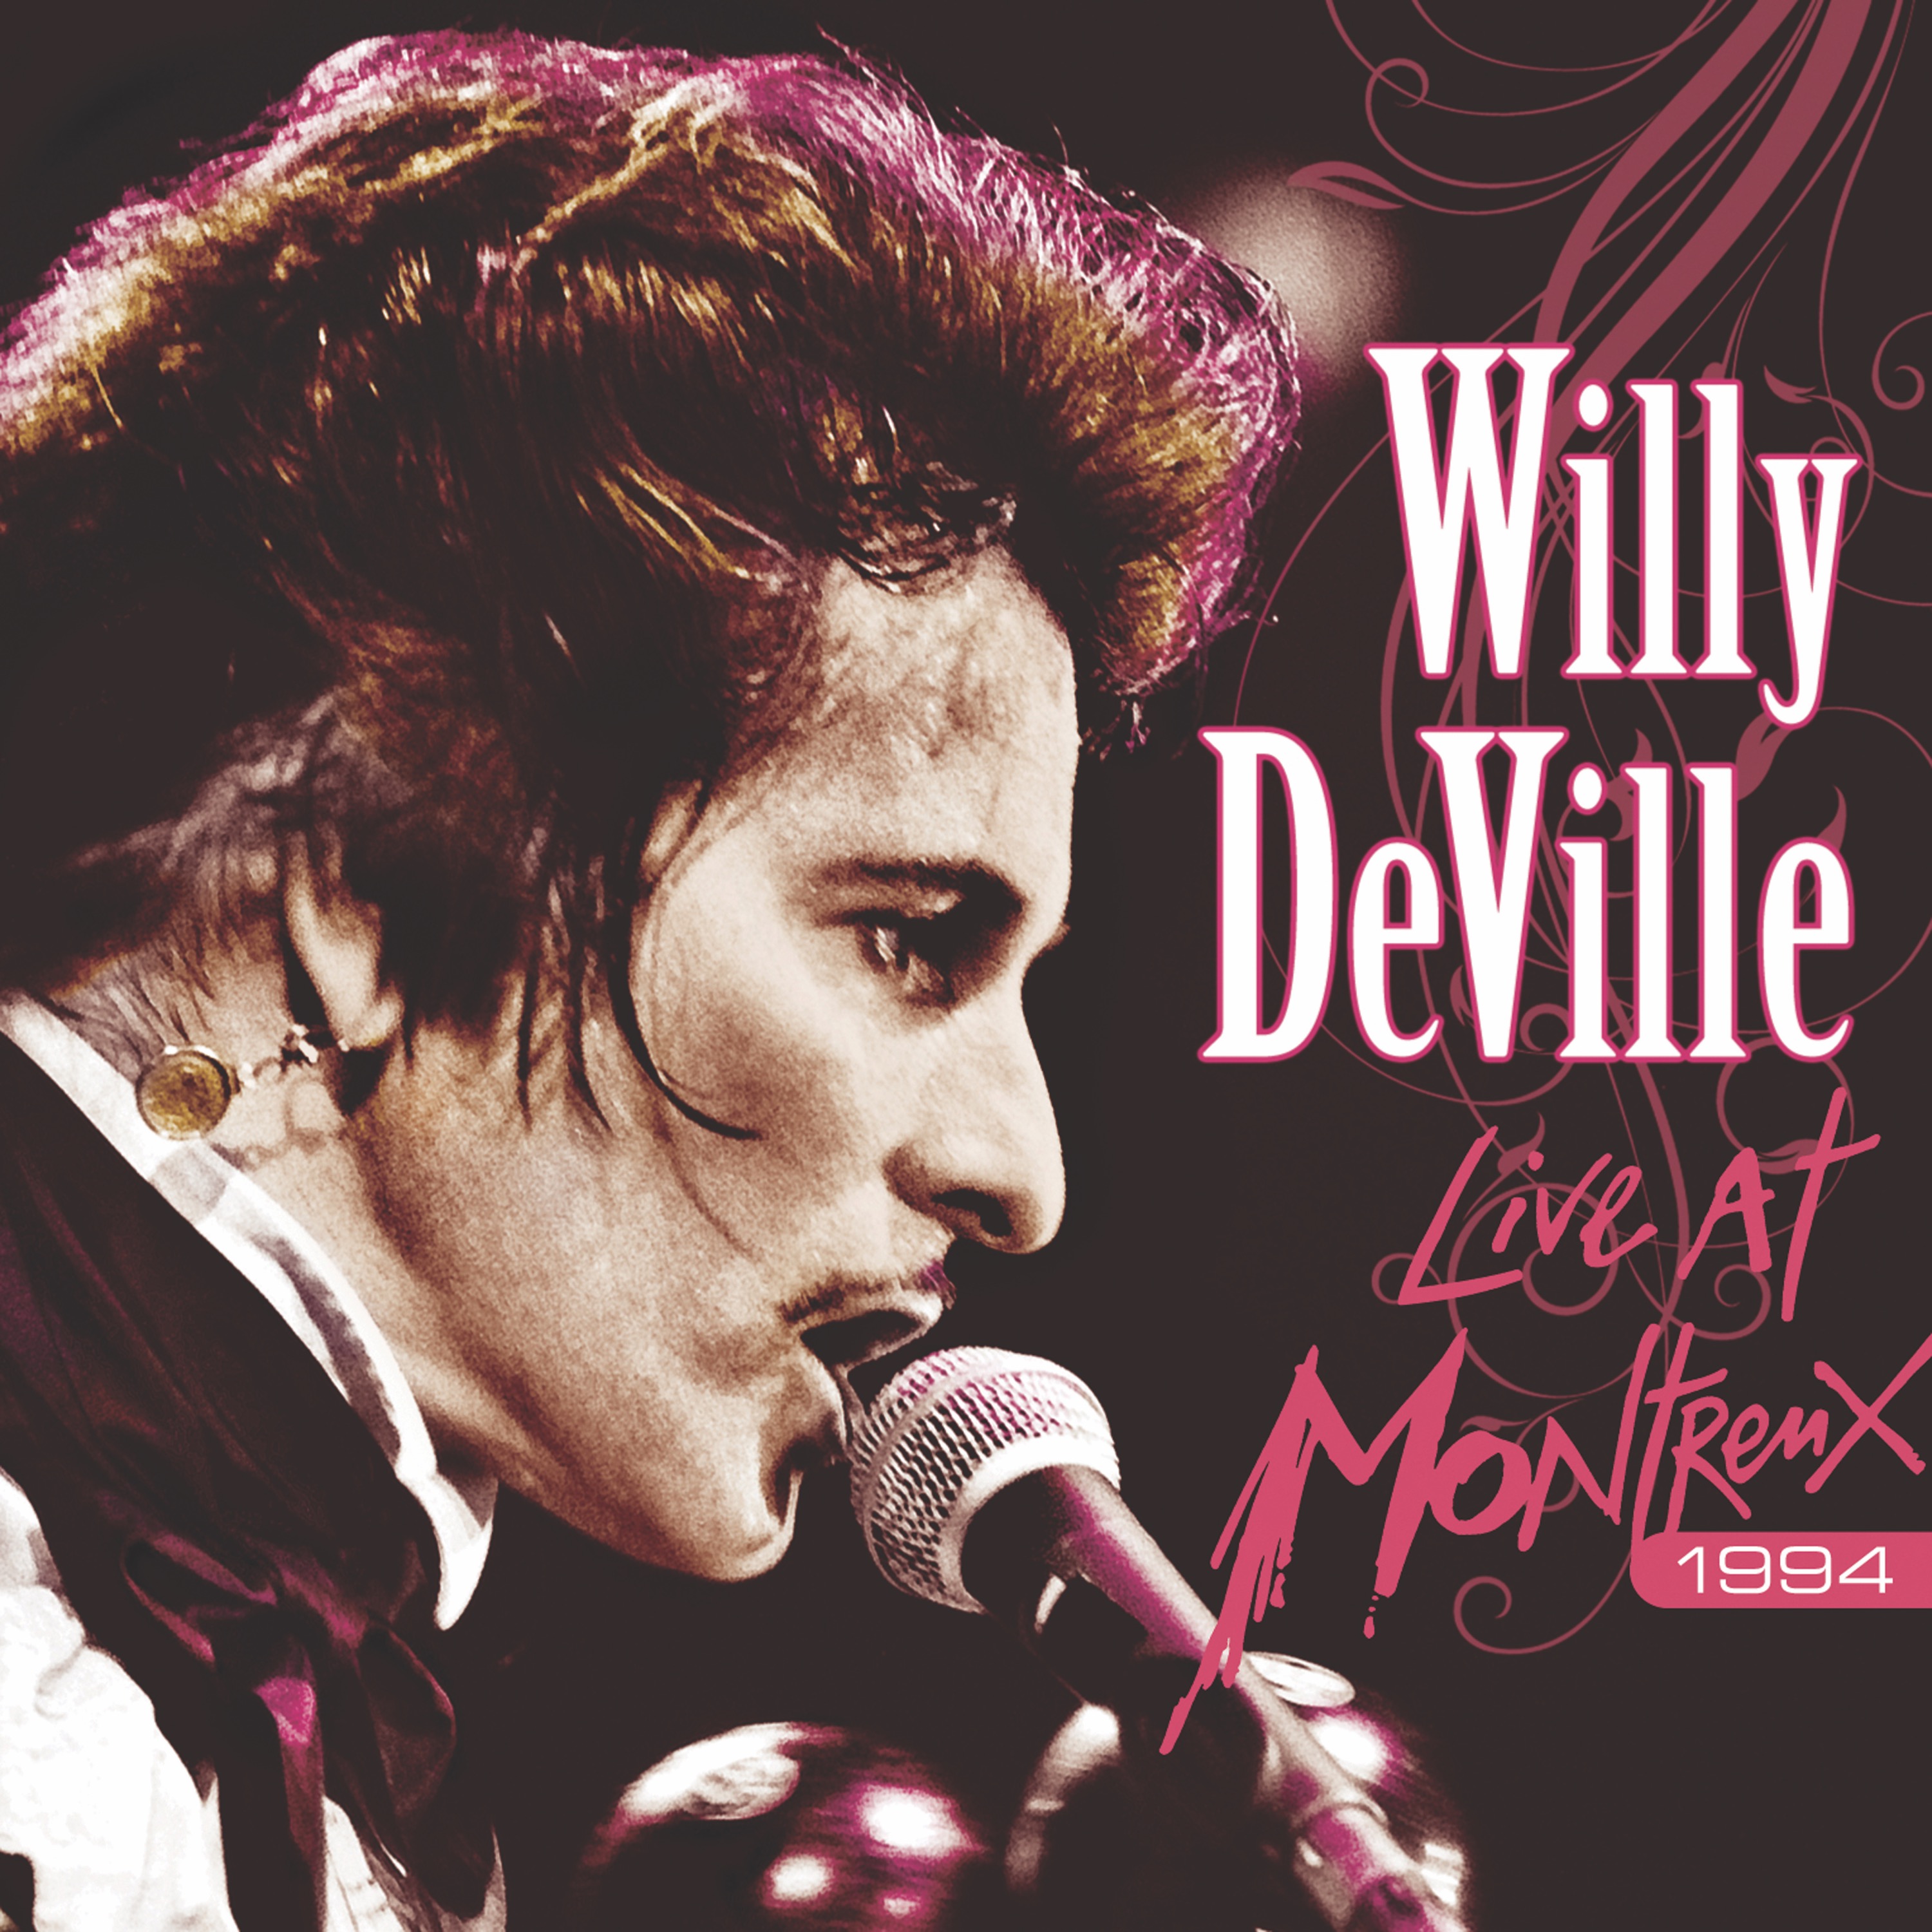 Willy DeVille - Live At Montreux 1994 - CD+DVD